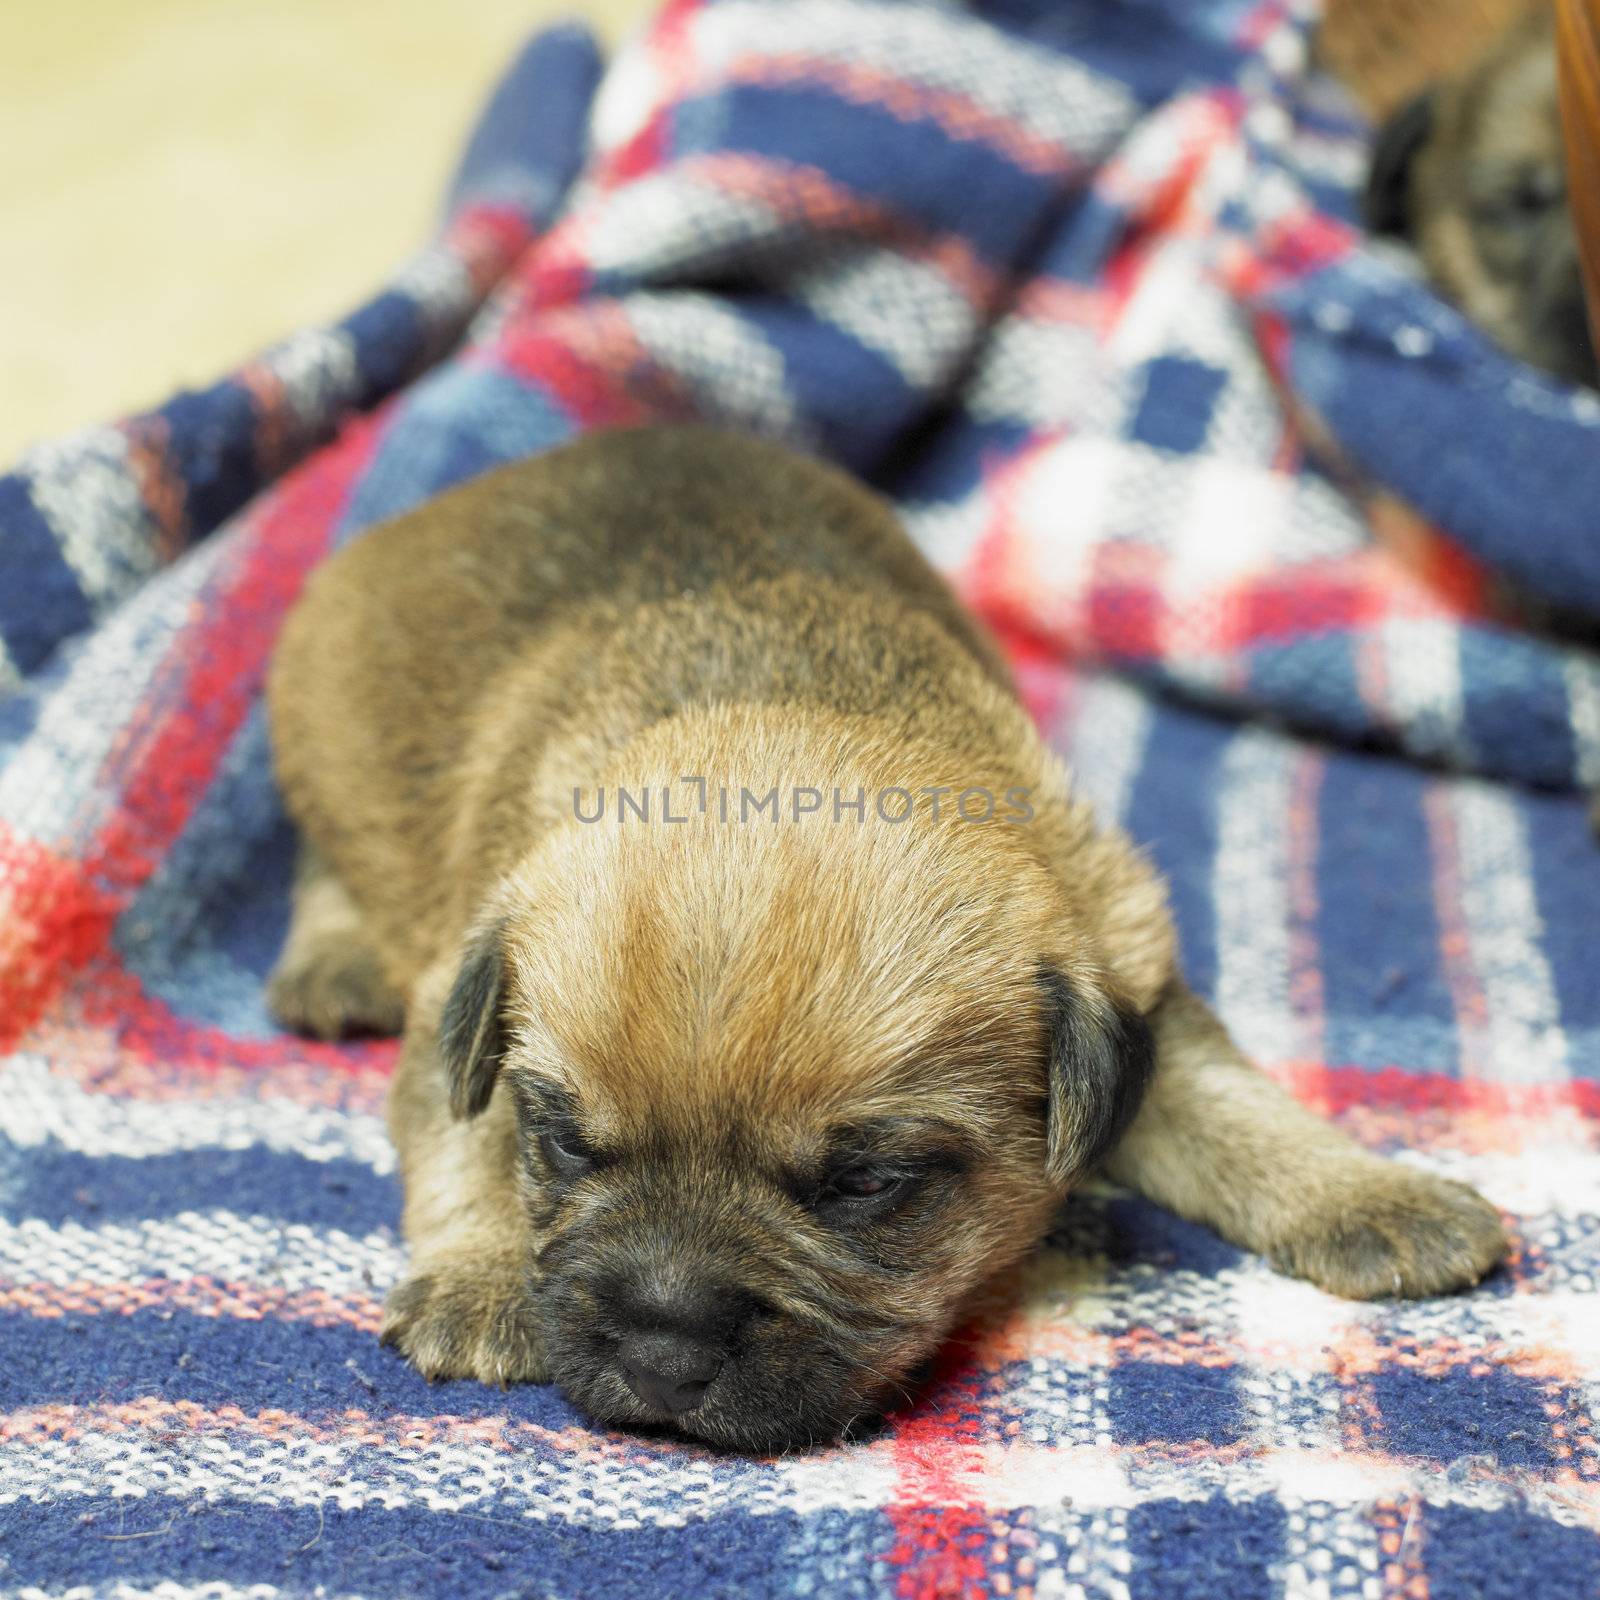 puppy (Border Terrier) by phbcz